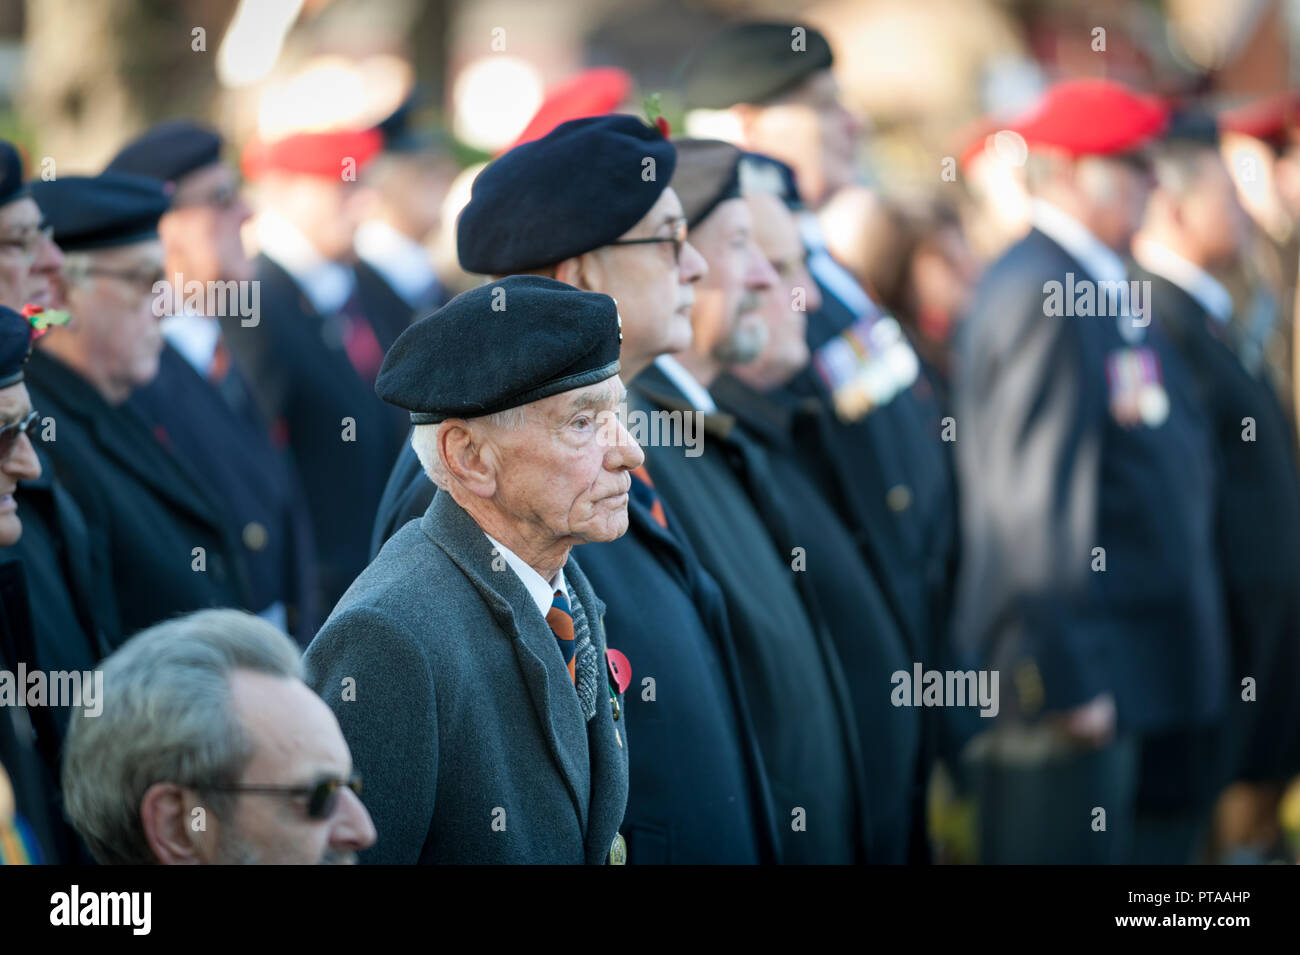 Chichester, West Sussex, UK. 12th November 2017. John White (front), aged 81 and president of the Royal Sussex Regiment Association Chichester branch, Stock Photo